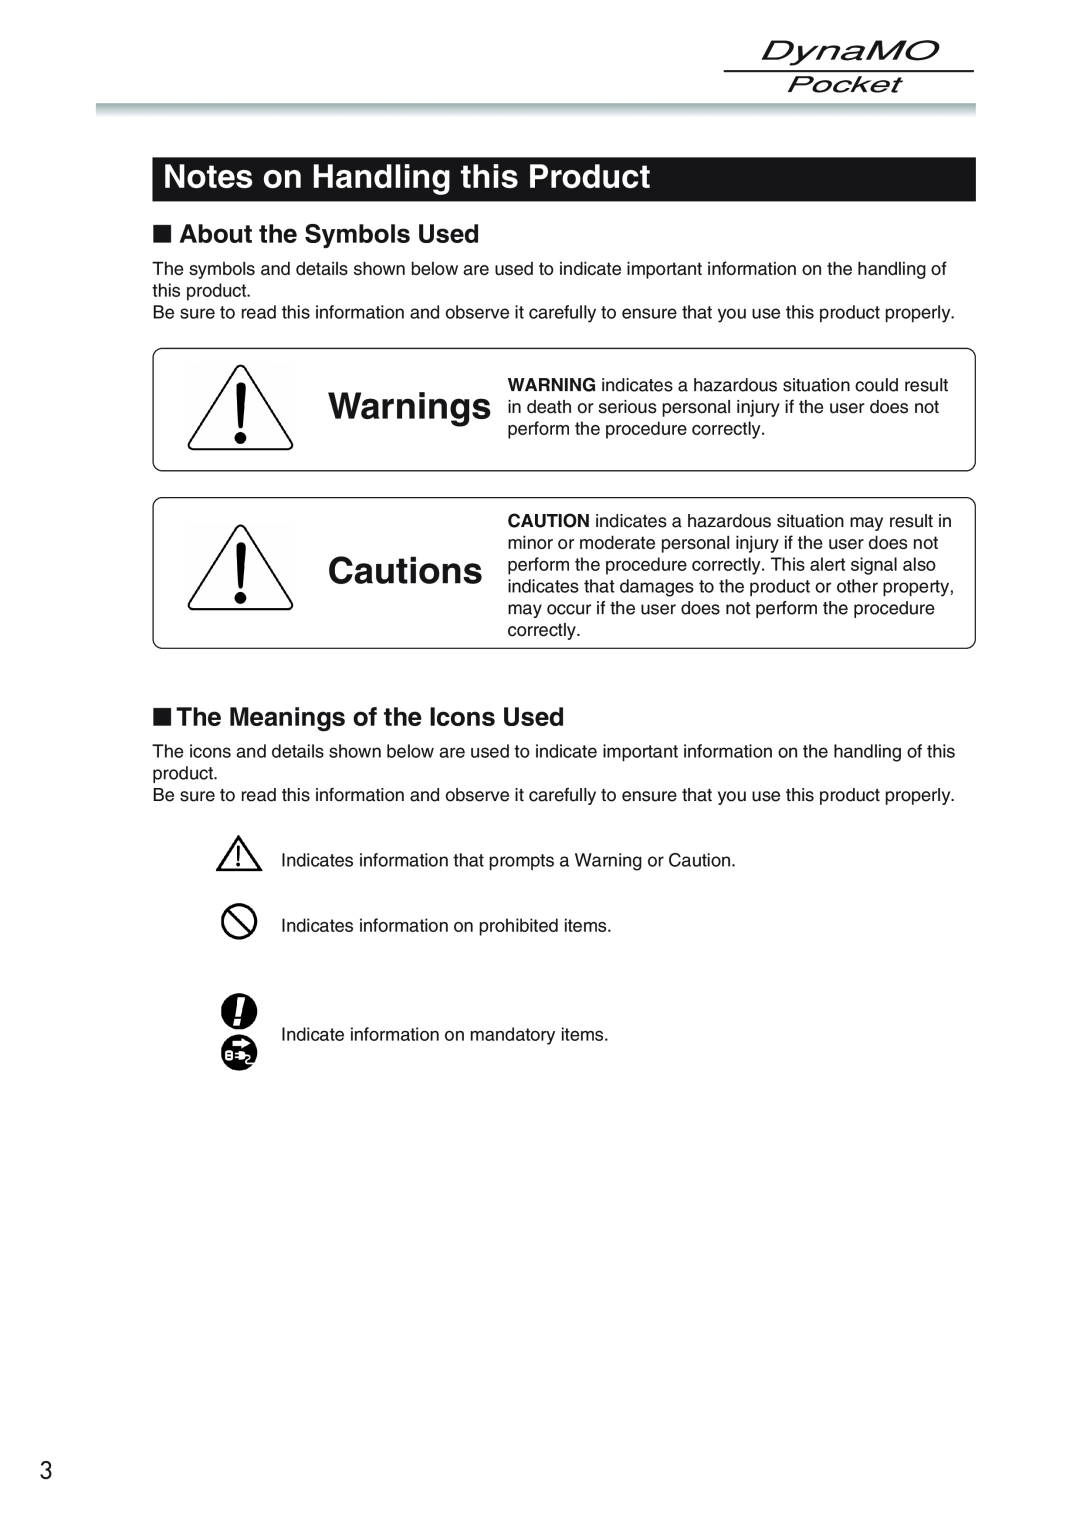 Fujitsu 1300U2 Warnings Cautions, About the Symbols Used, The Meanings of the Icons Used, Notes on Handling this Product 